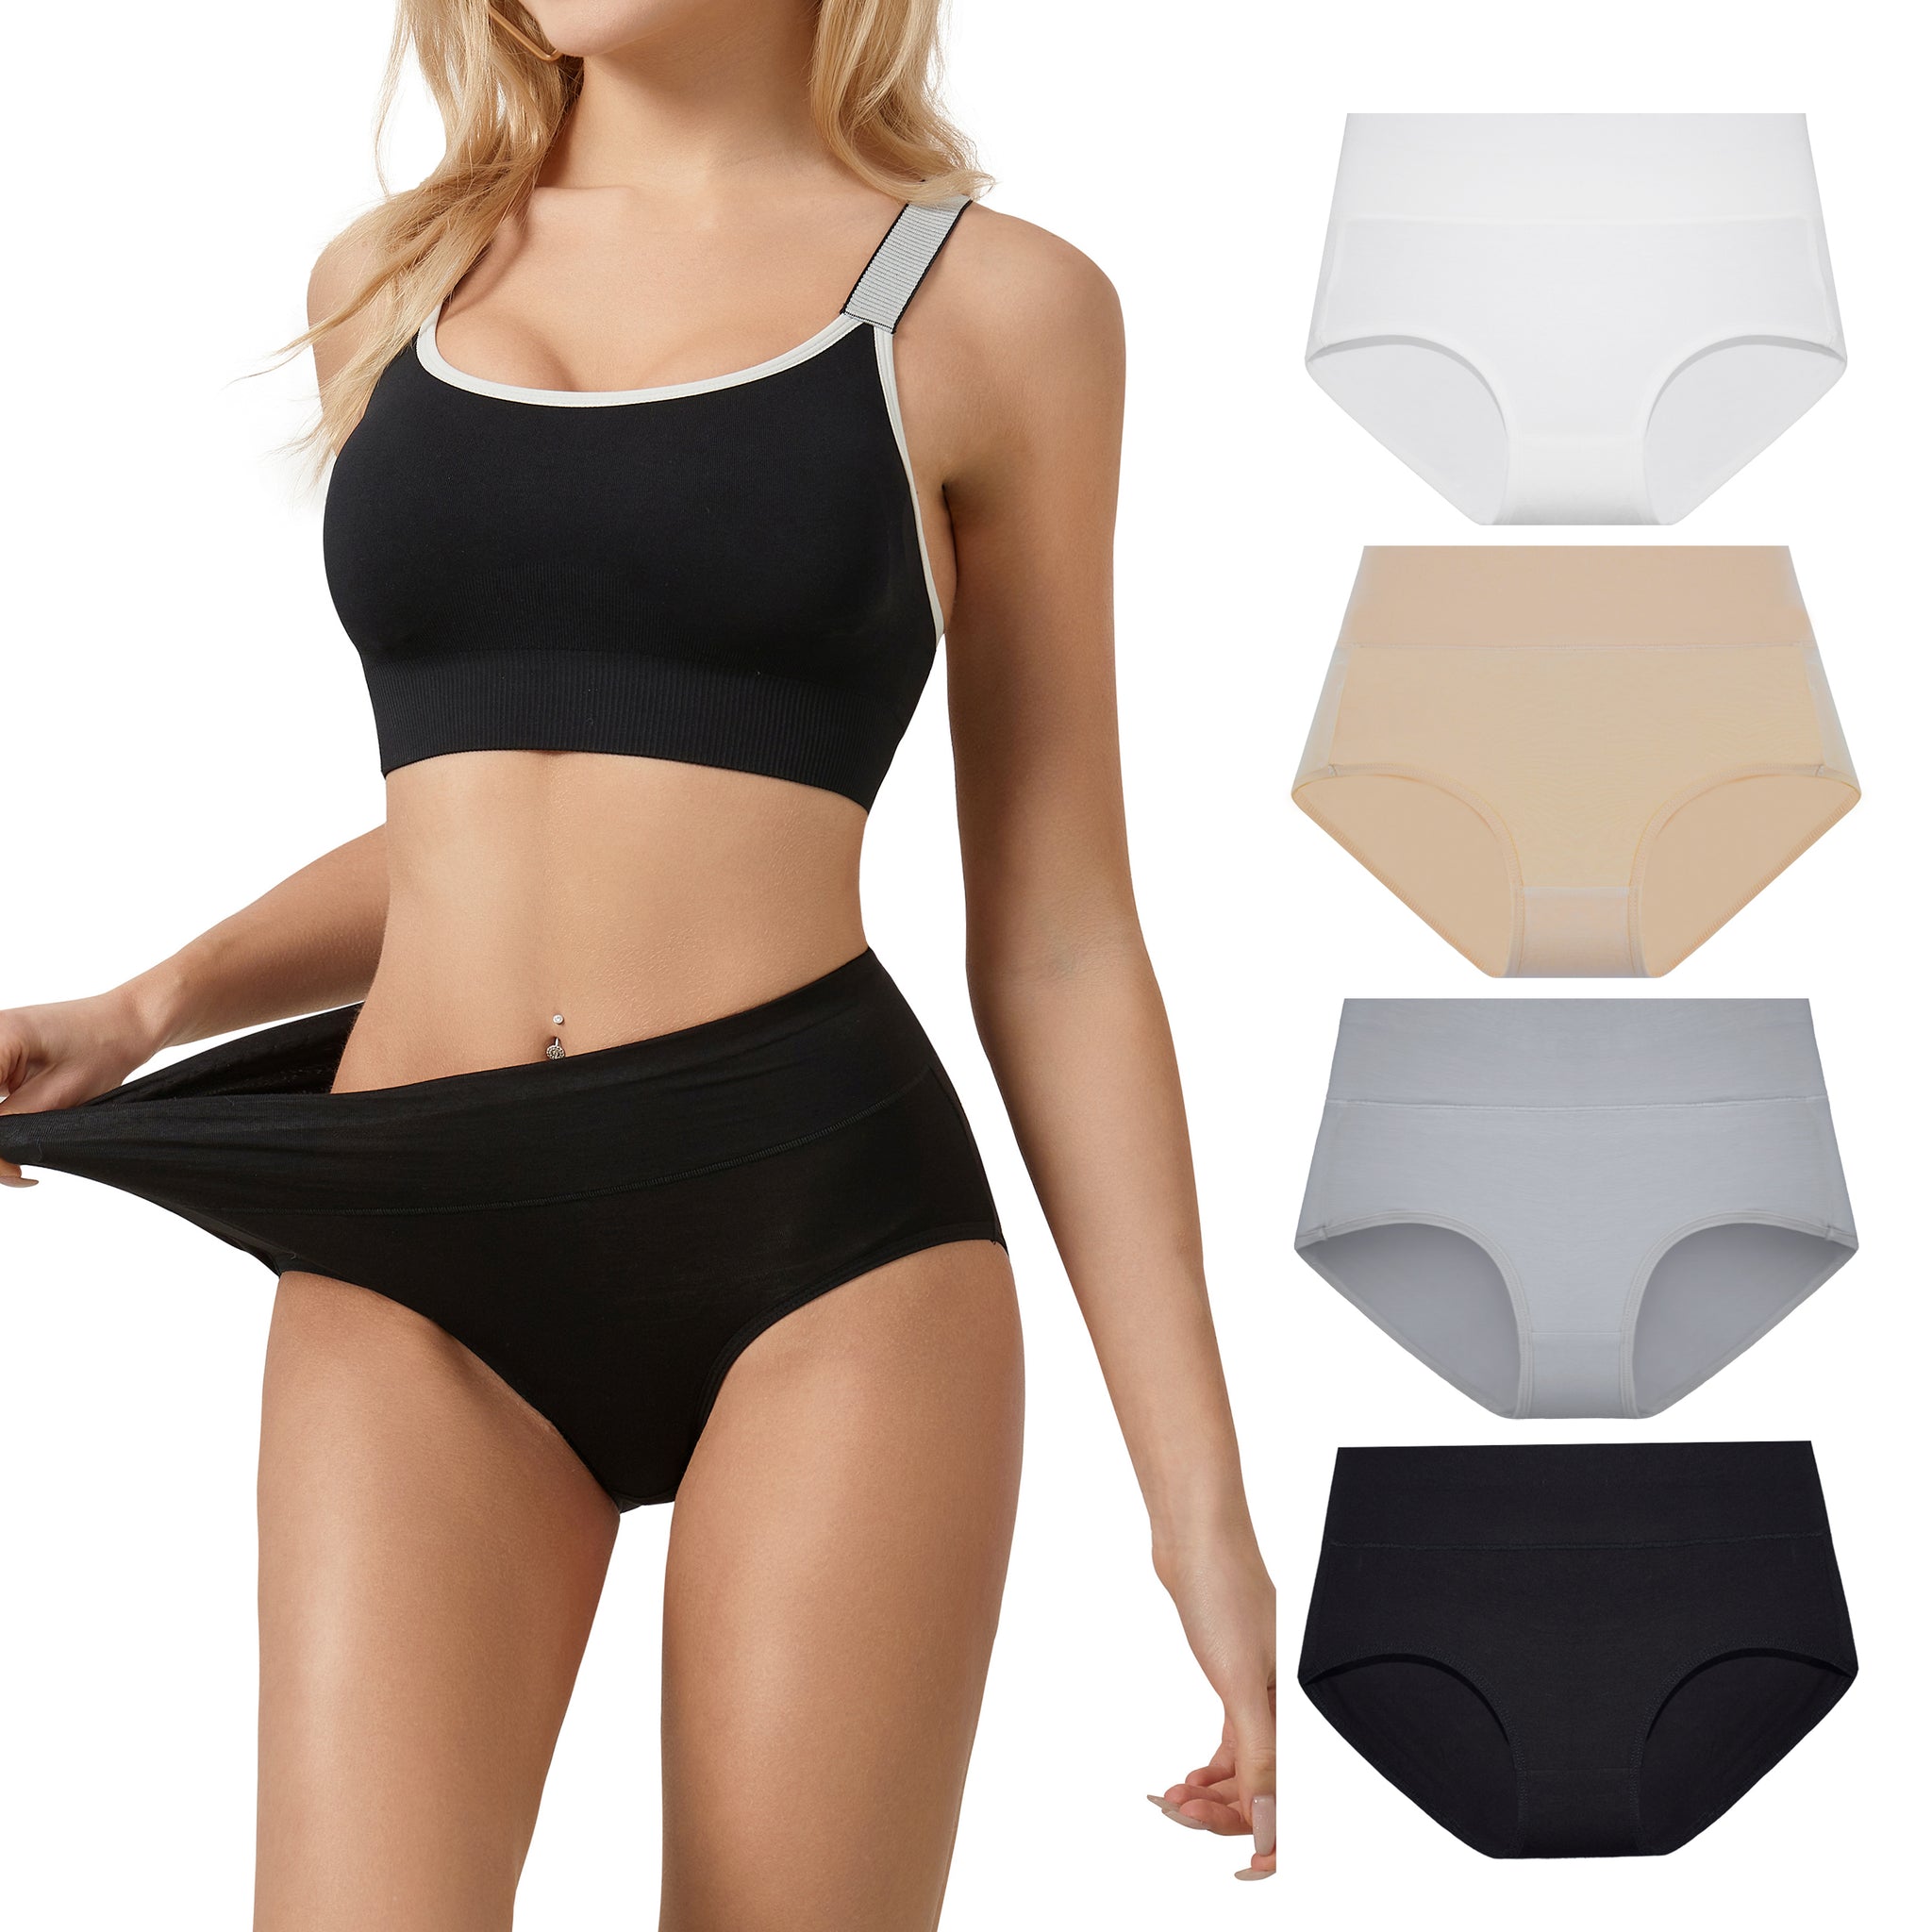 SERISIMPLE Bamboo Women Luxury Underwear Silky Comfy Ultra Soft Briefs  Breathable Stretch High&Mid Waist Panties 4 Pack